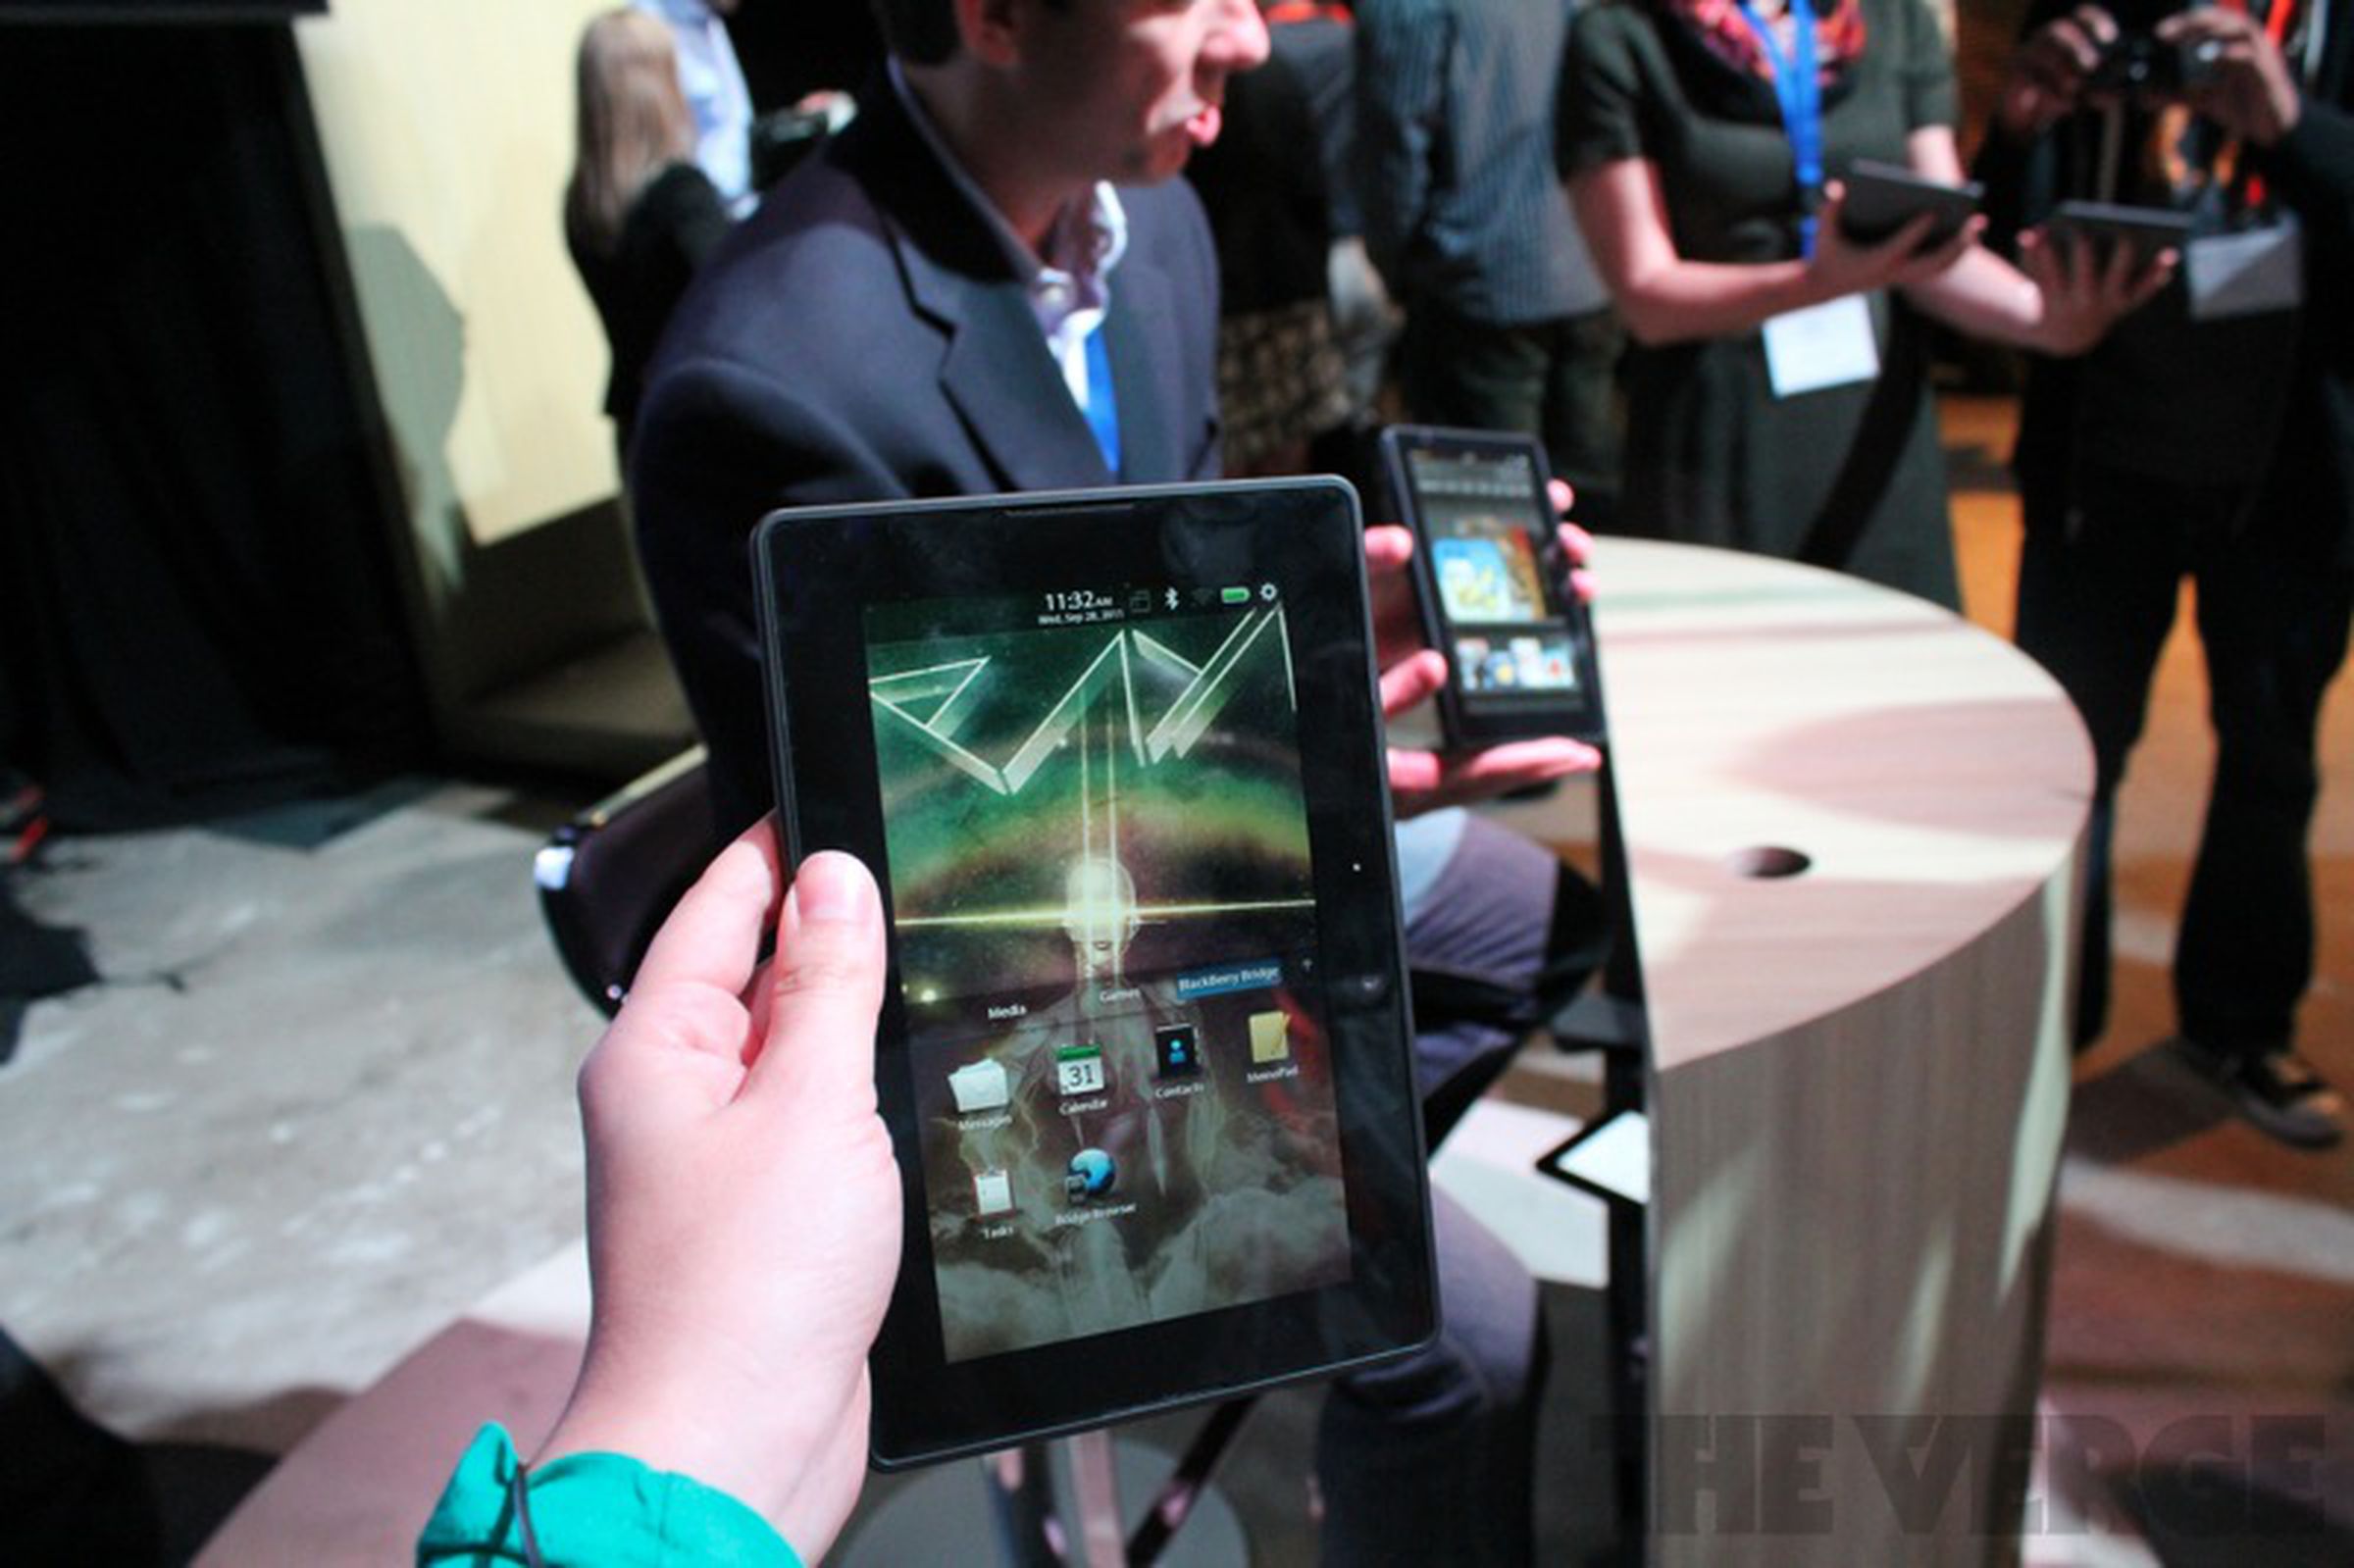 Amazon Kindle Fire hands-on pictures